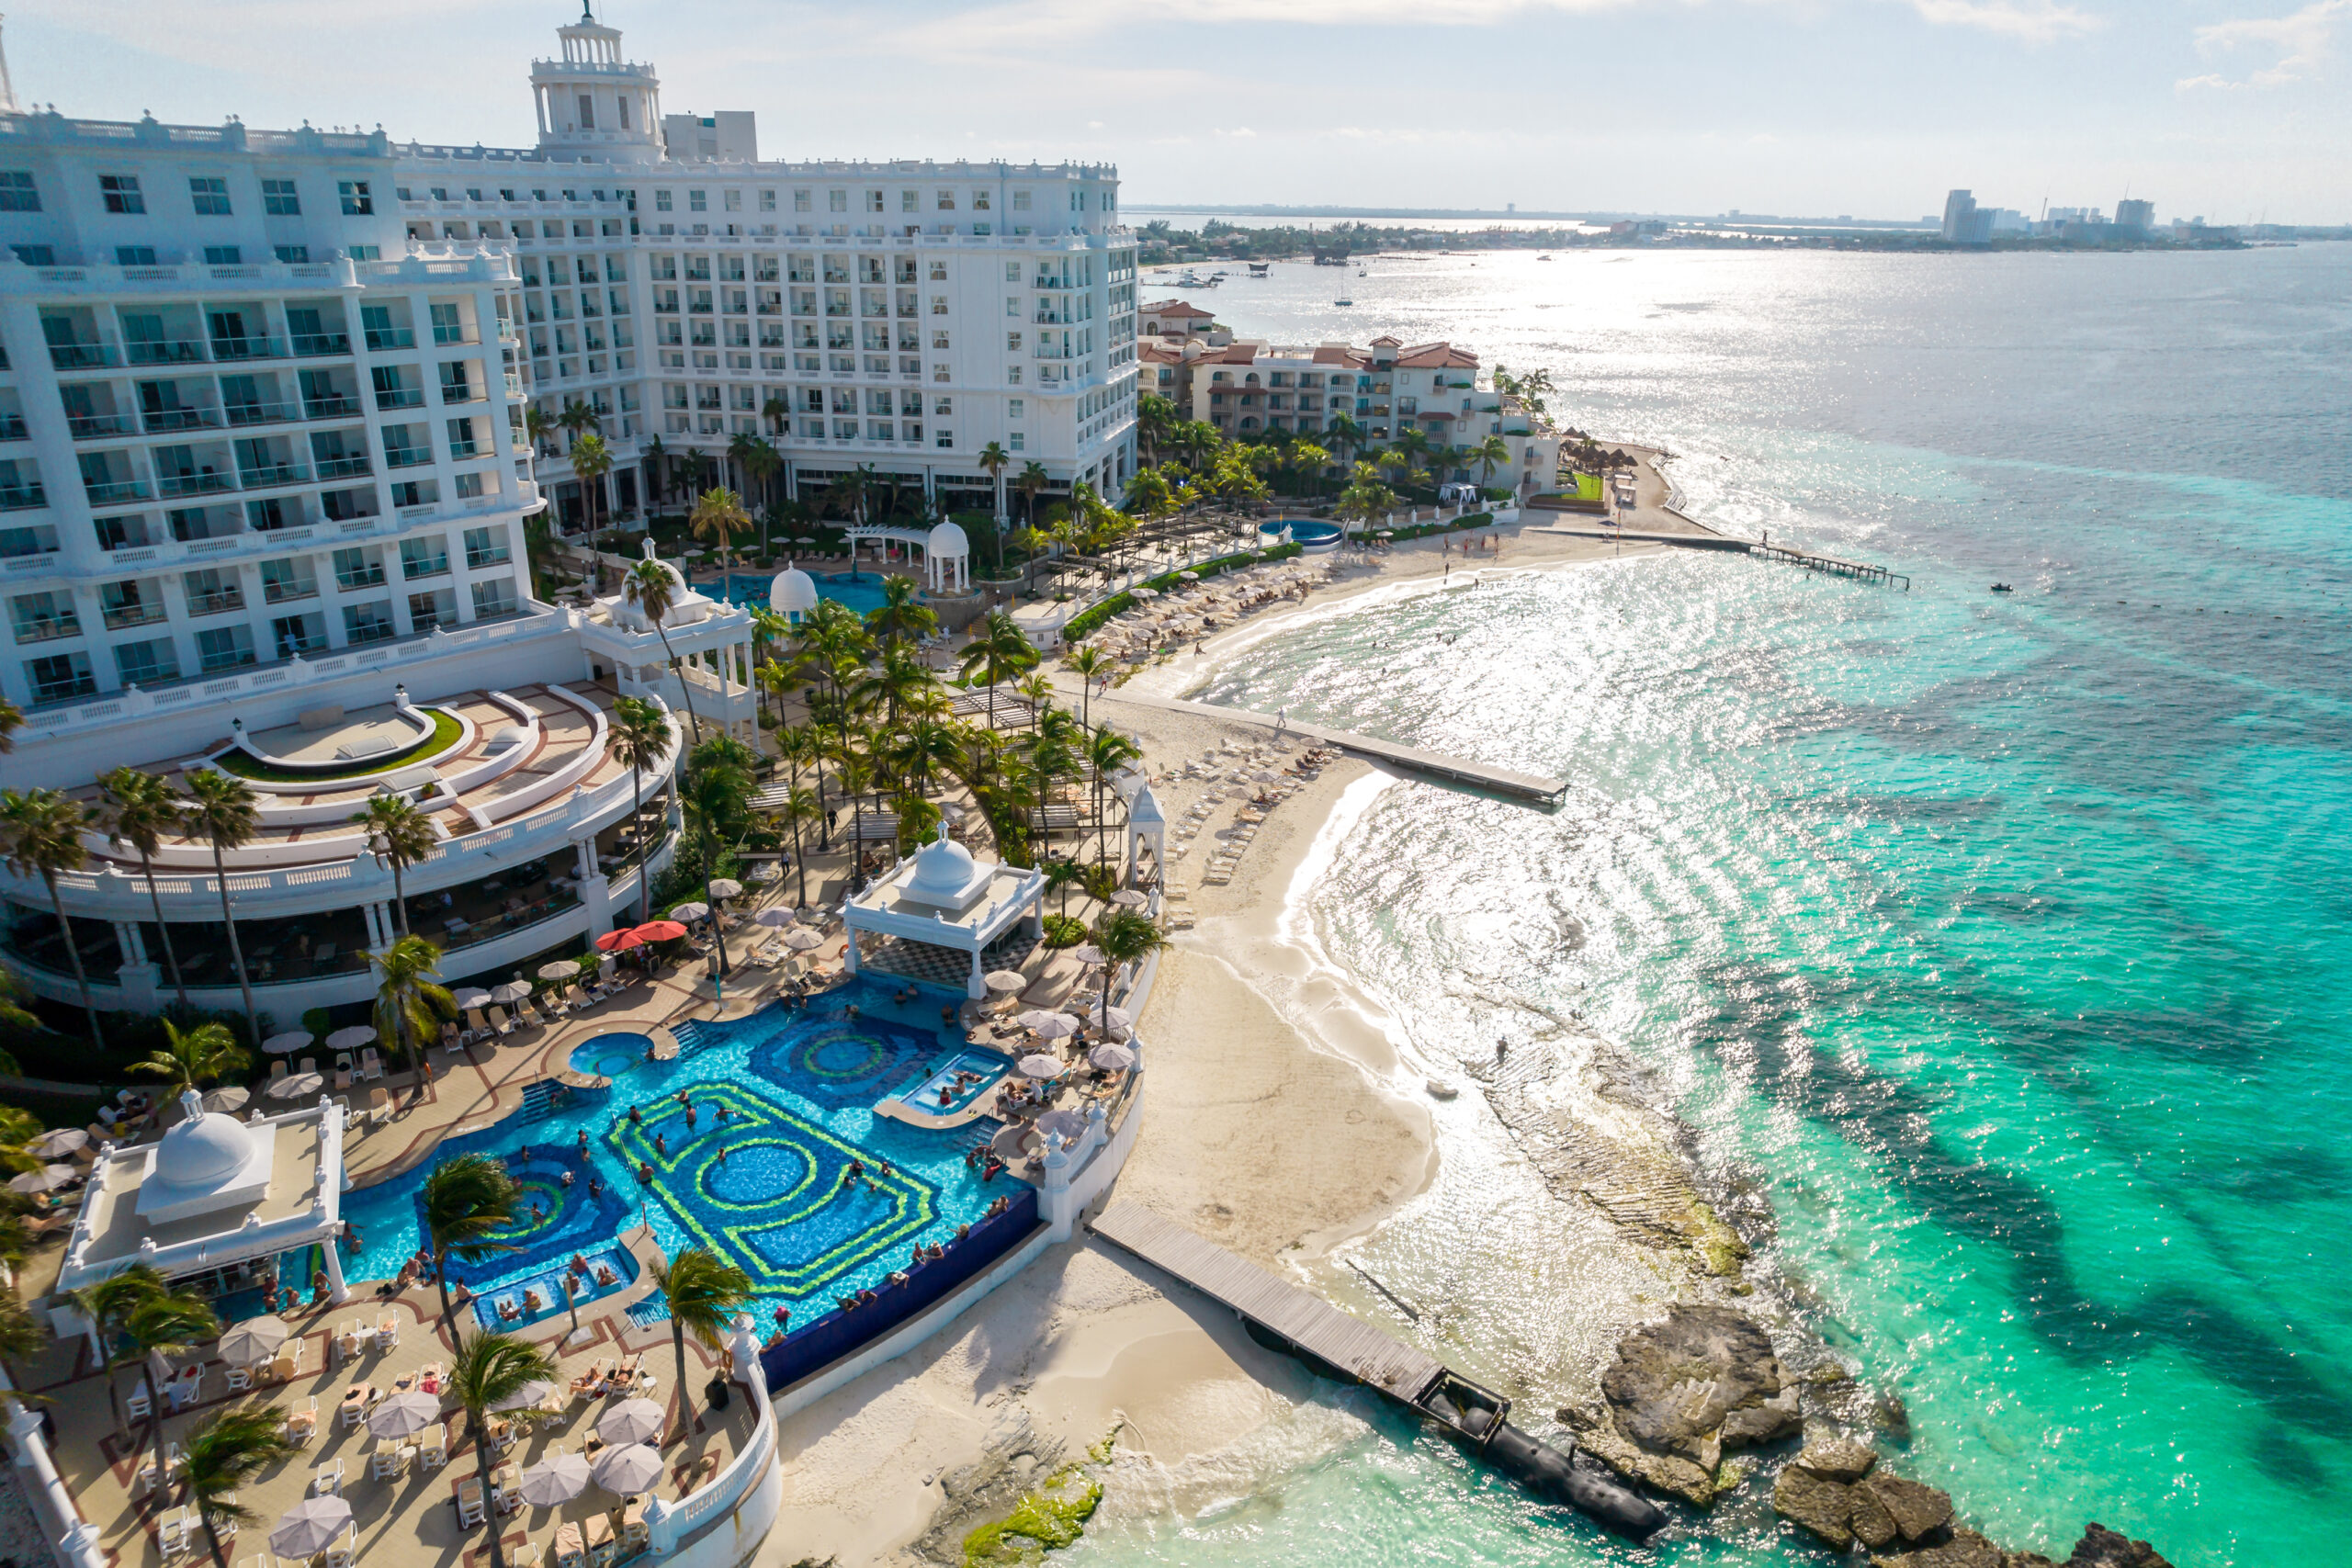 The Emotional Journey of Finding the Best of the Recommended All-Inclusive Resorts - All-Inclusive Resort in Cancun Mexico